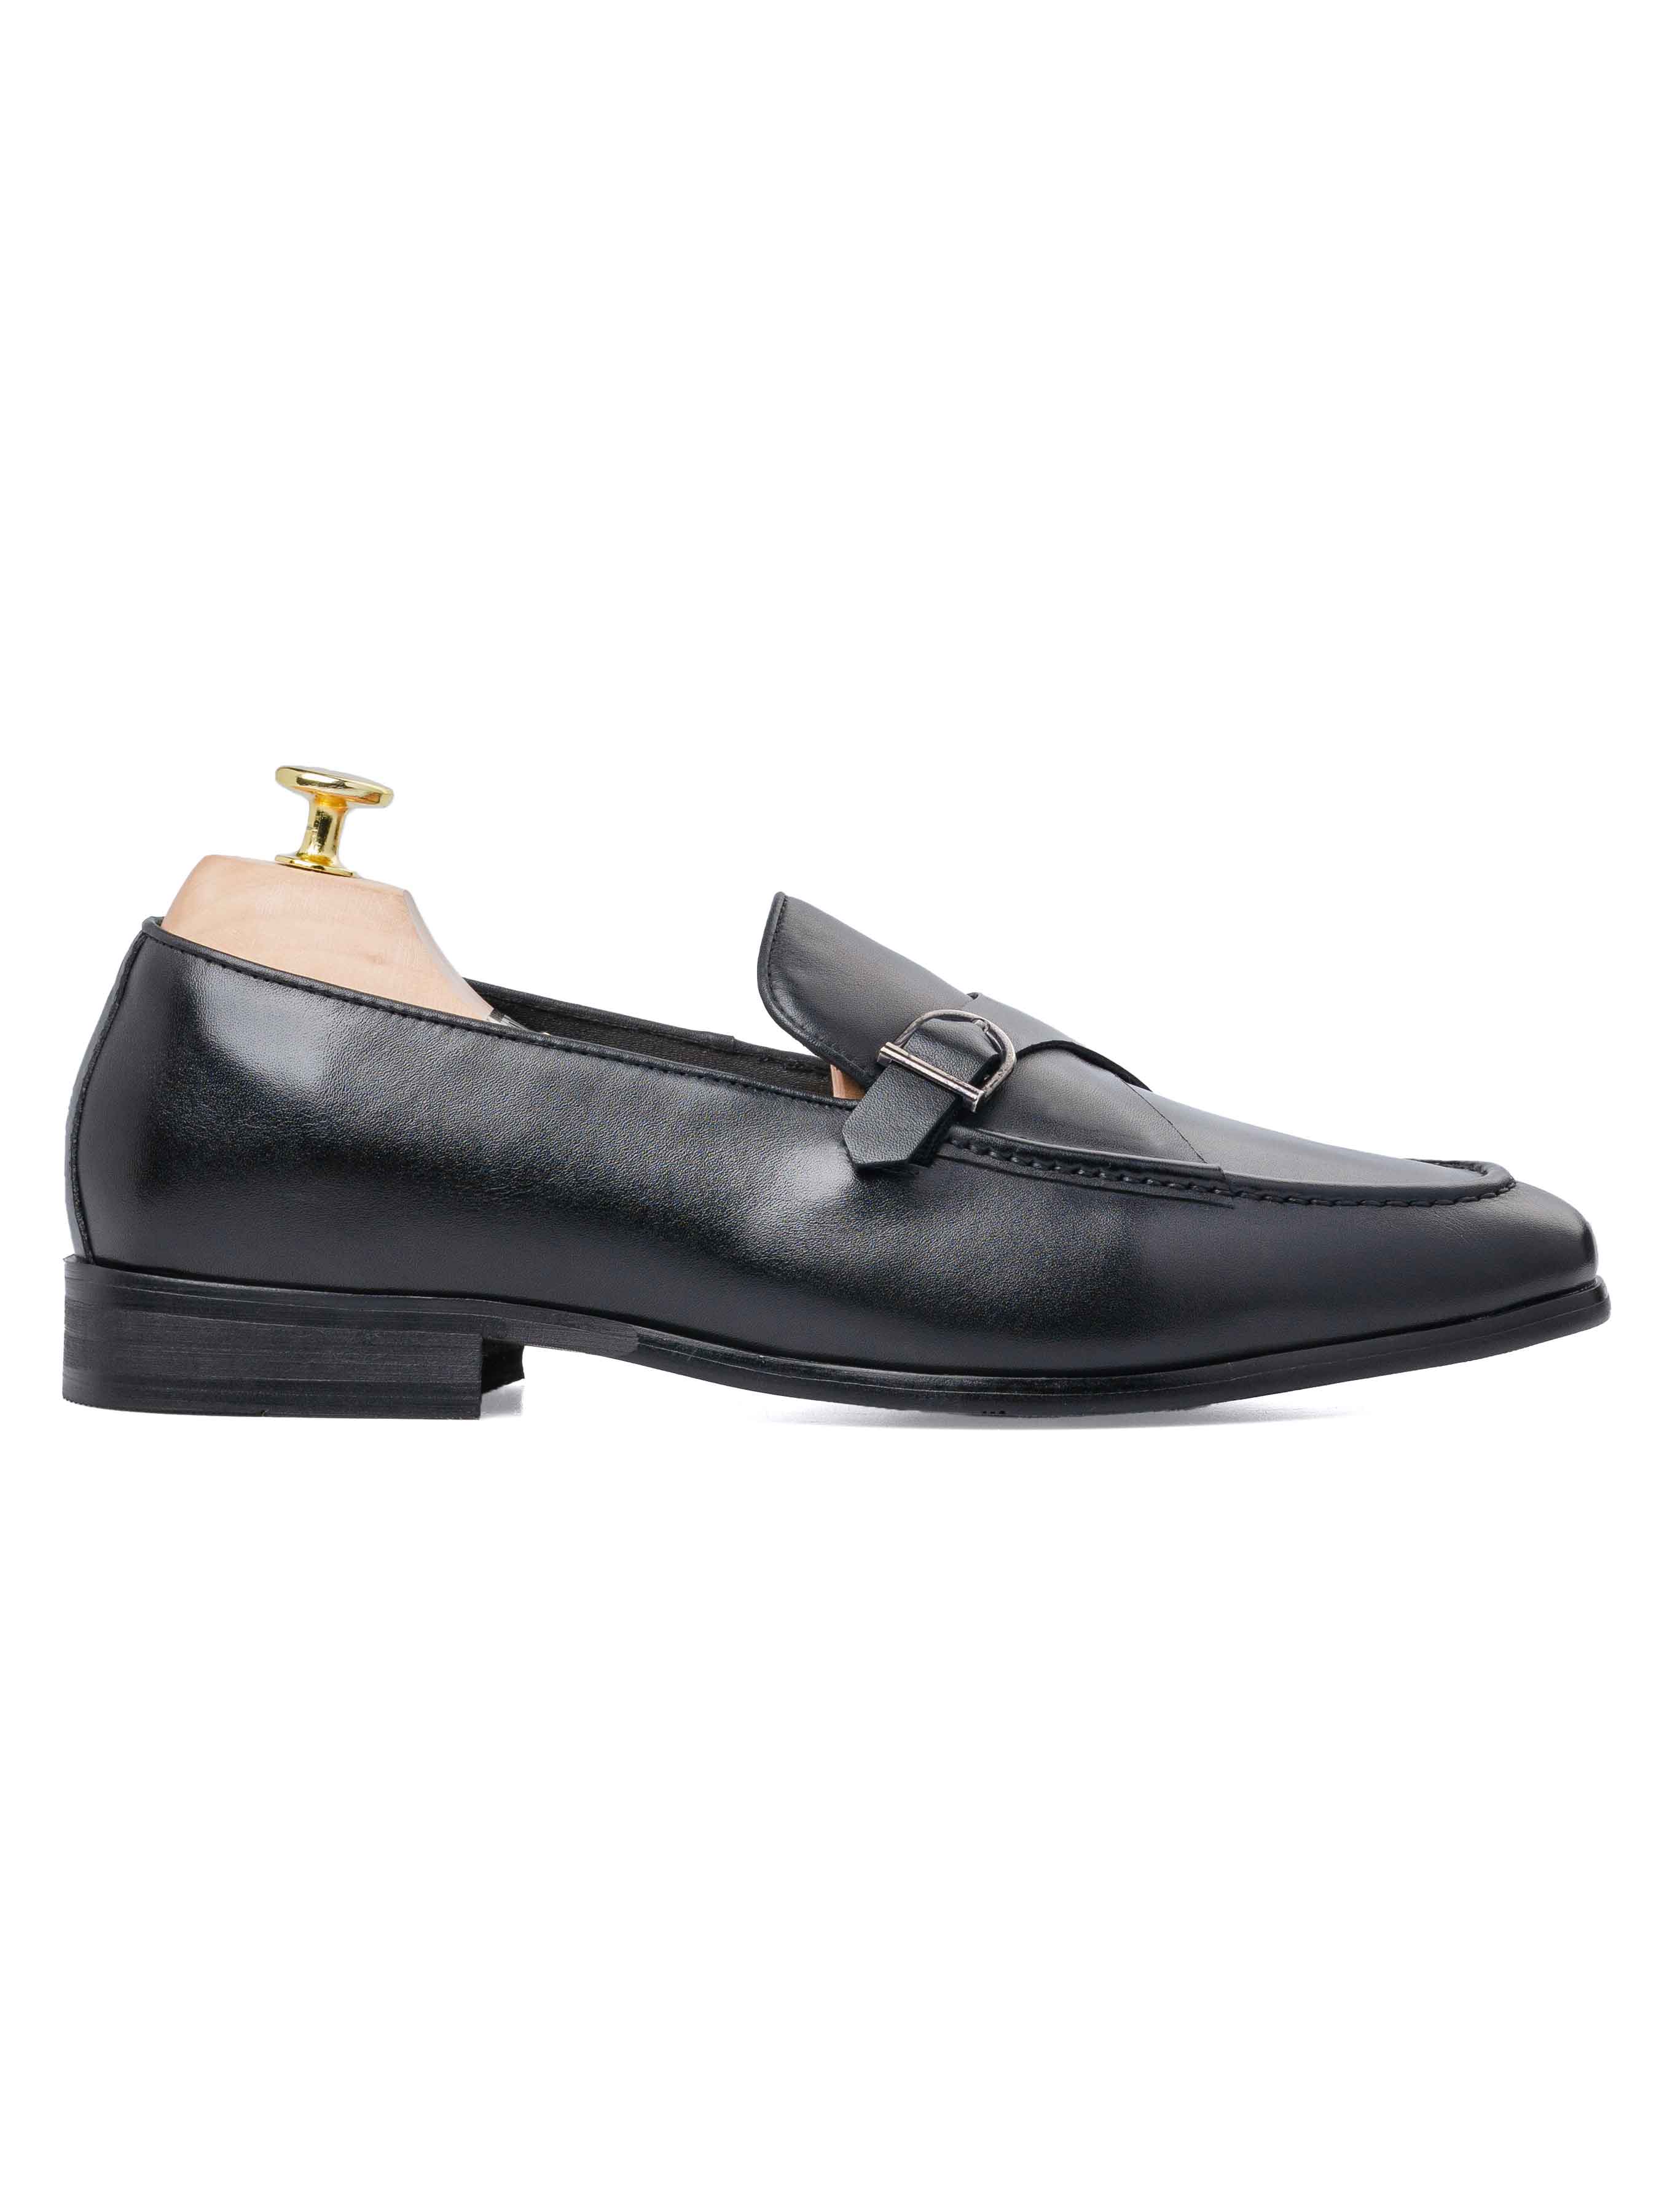 Leo Duo Strap Loafer - Solid Black